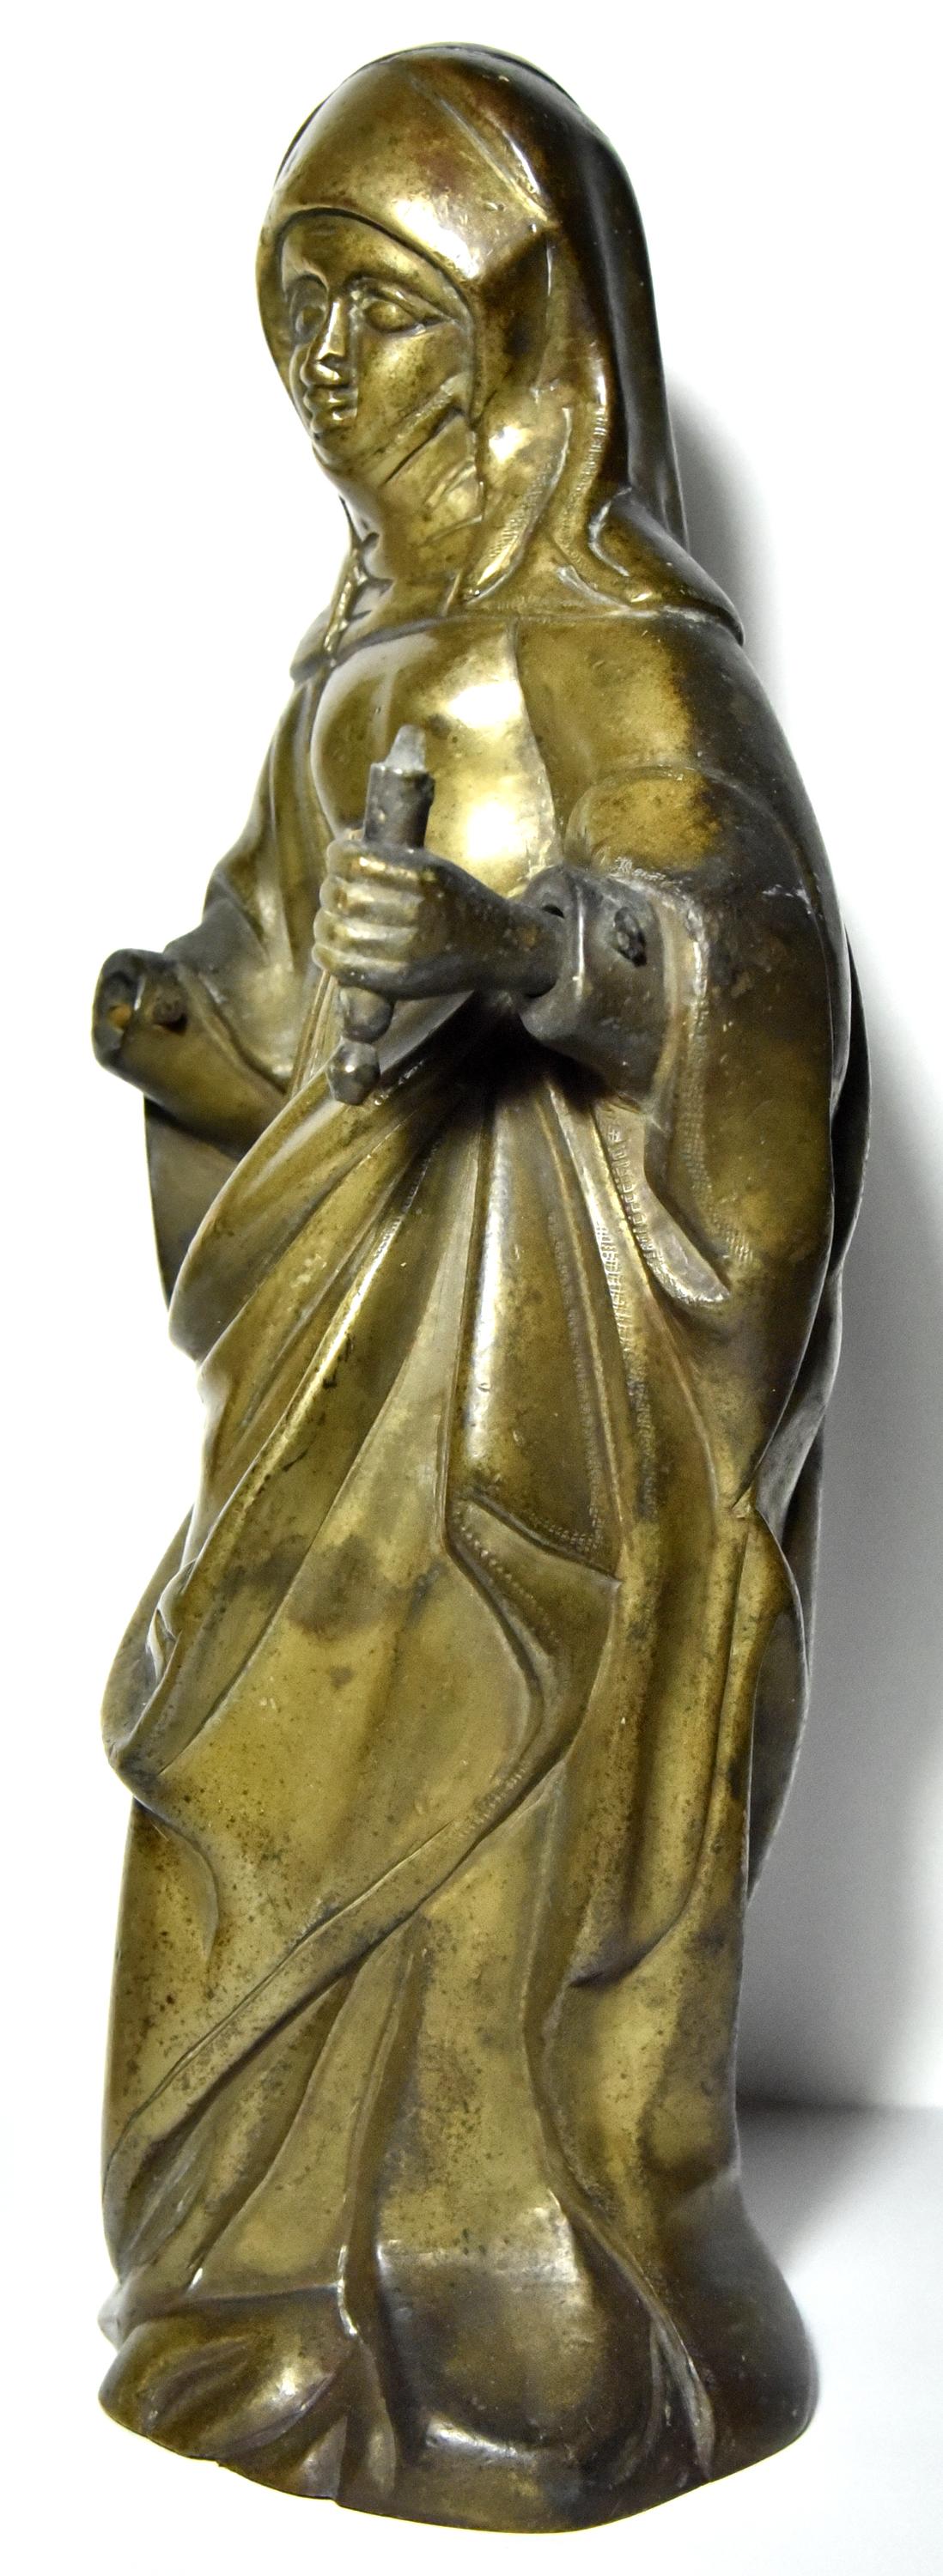 Figure of a saint in bronze, late 15th century, southern Netherlands - Sculpture by Unknown